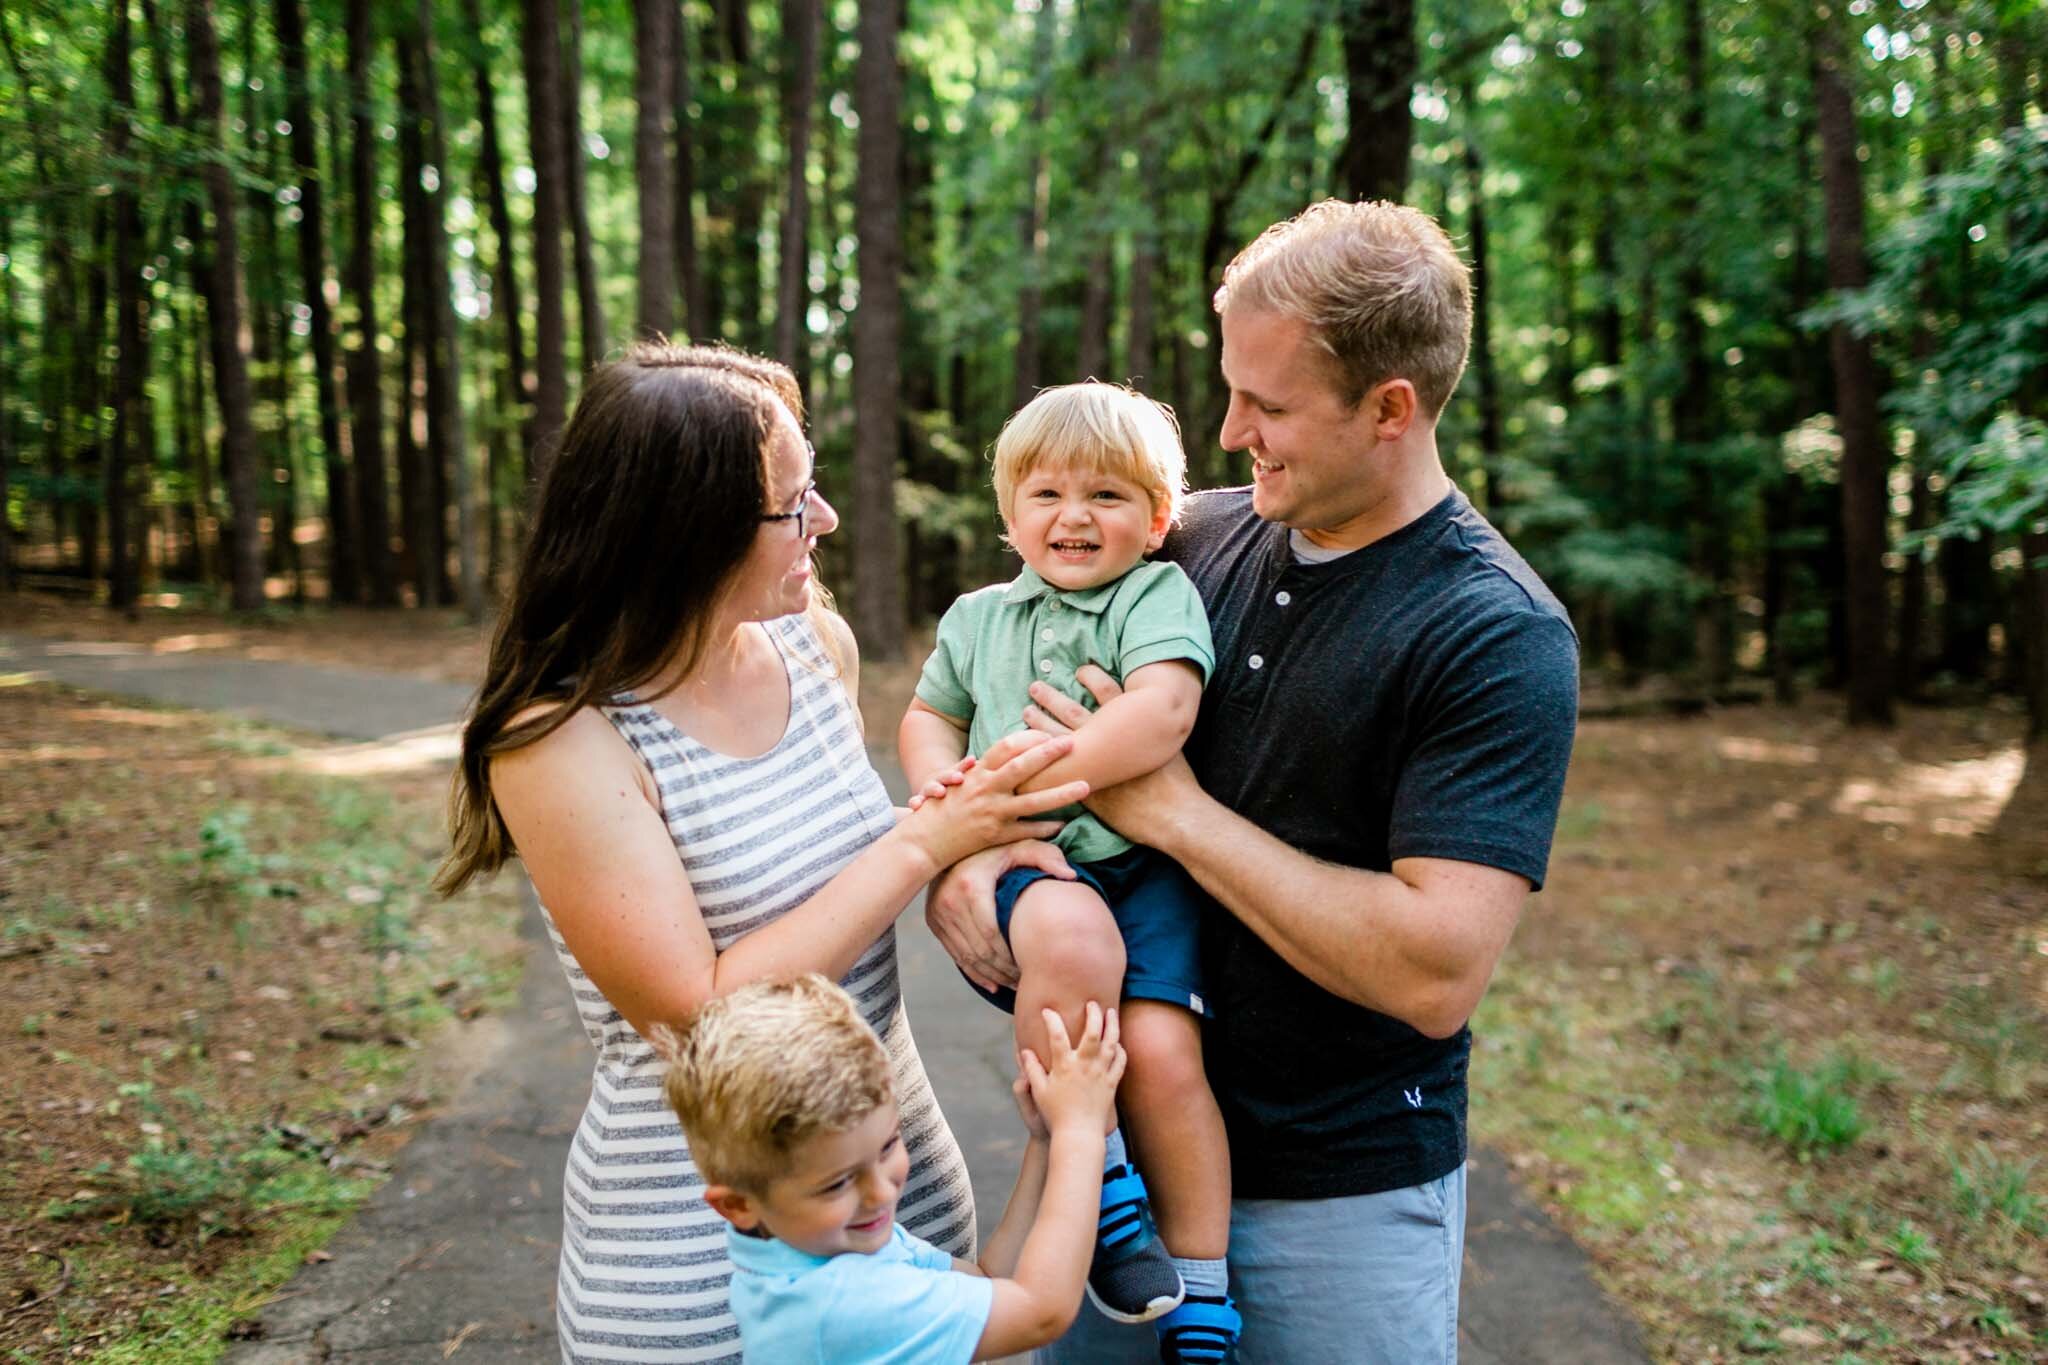 Raleigh Family Photographer | Umstead Park | By G. Lin Photography | Candid outdoor family photo